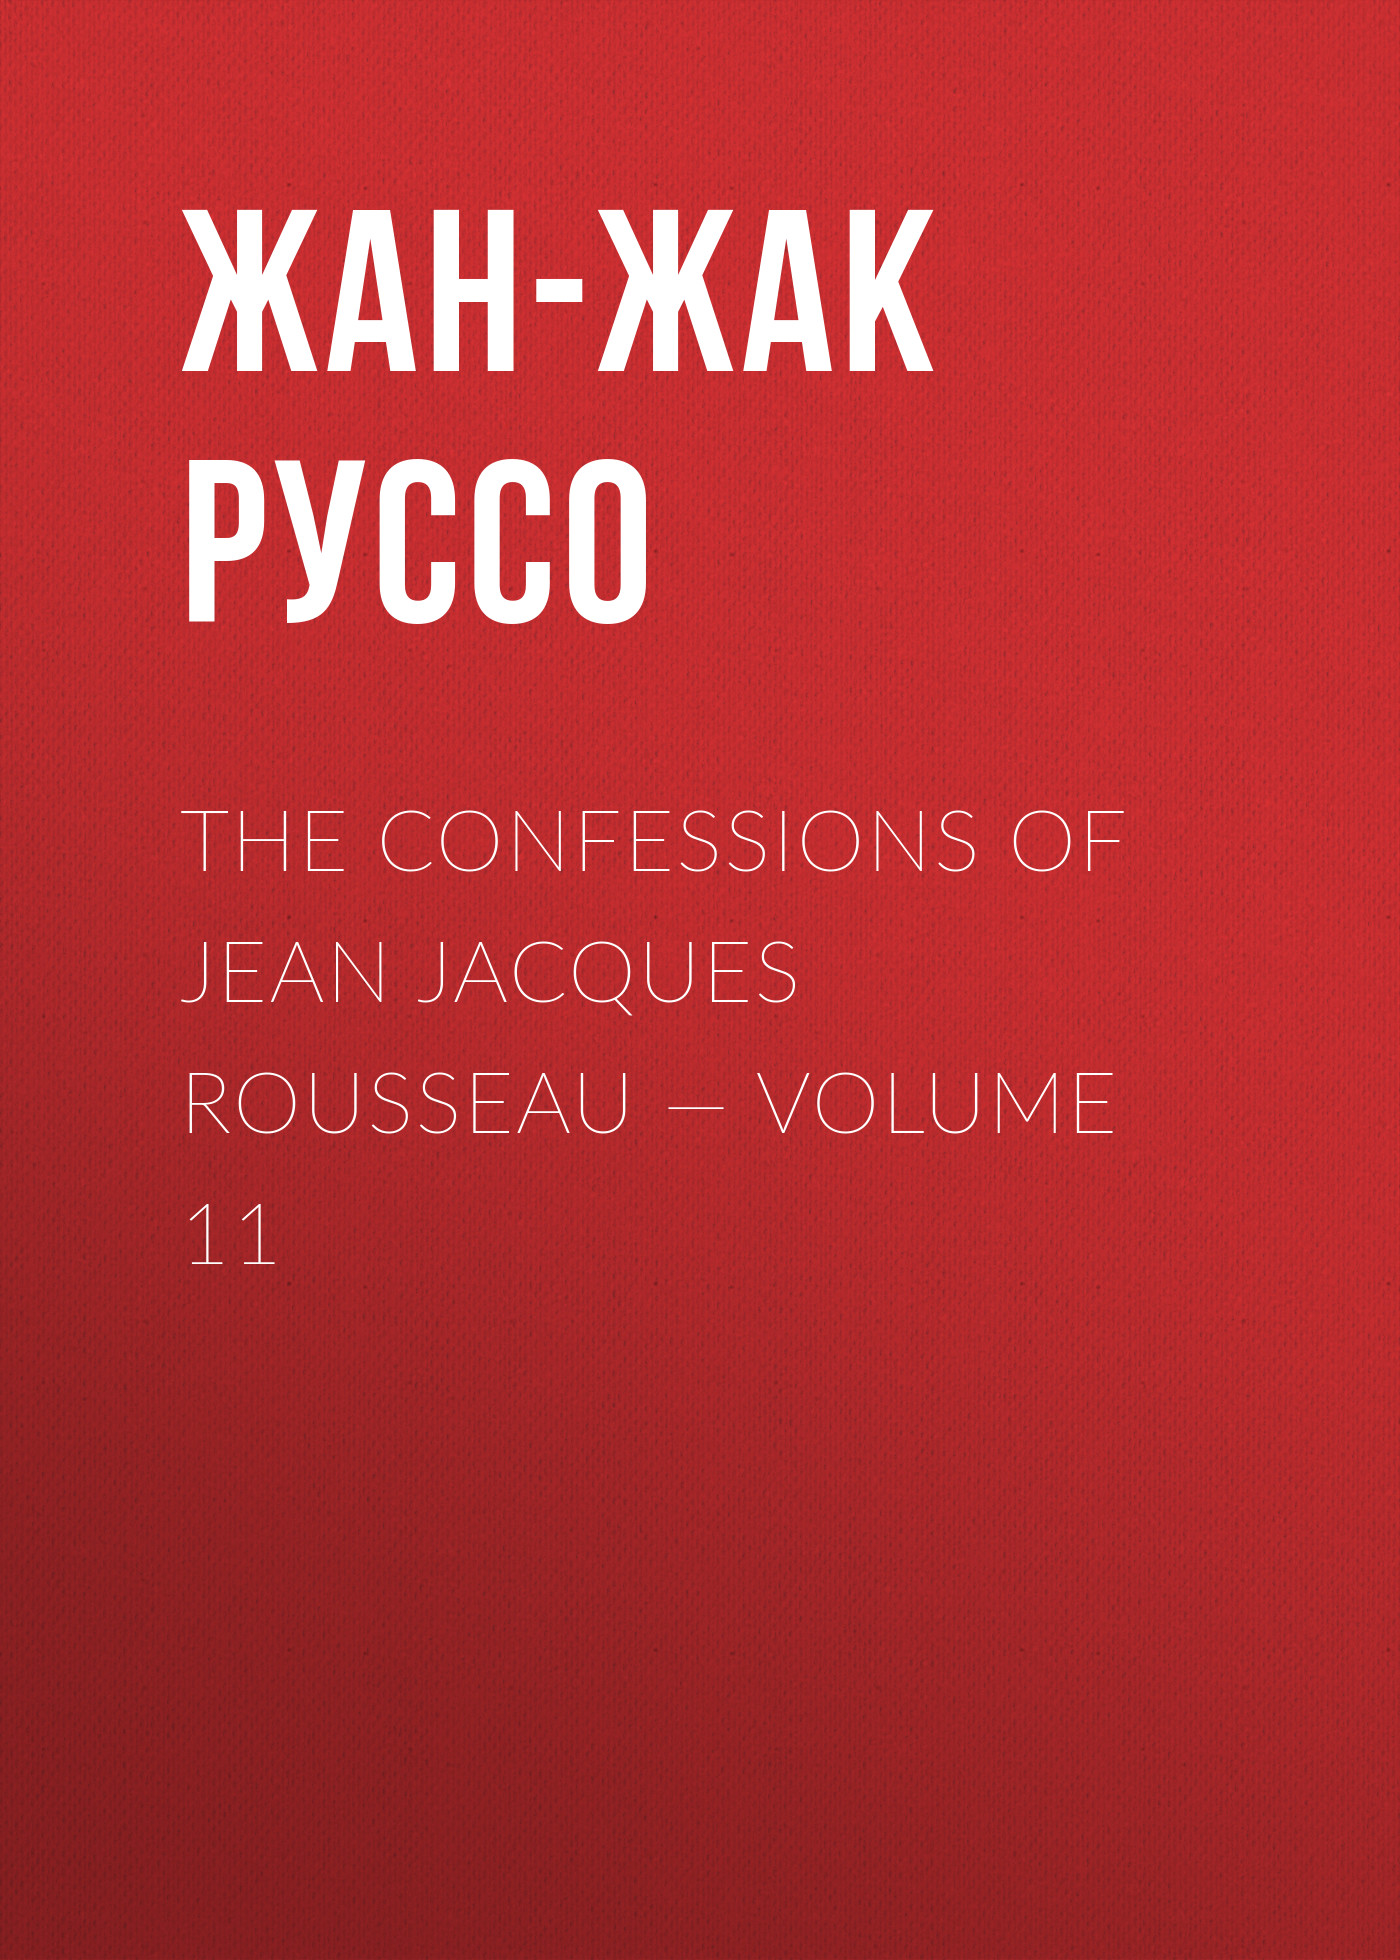 The Confessions of Jean Jacques Rousseau— Volume 11